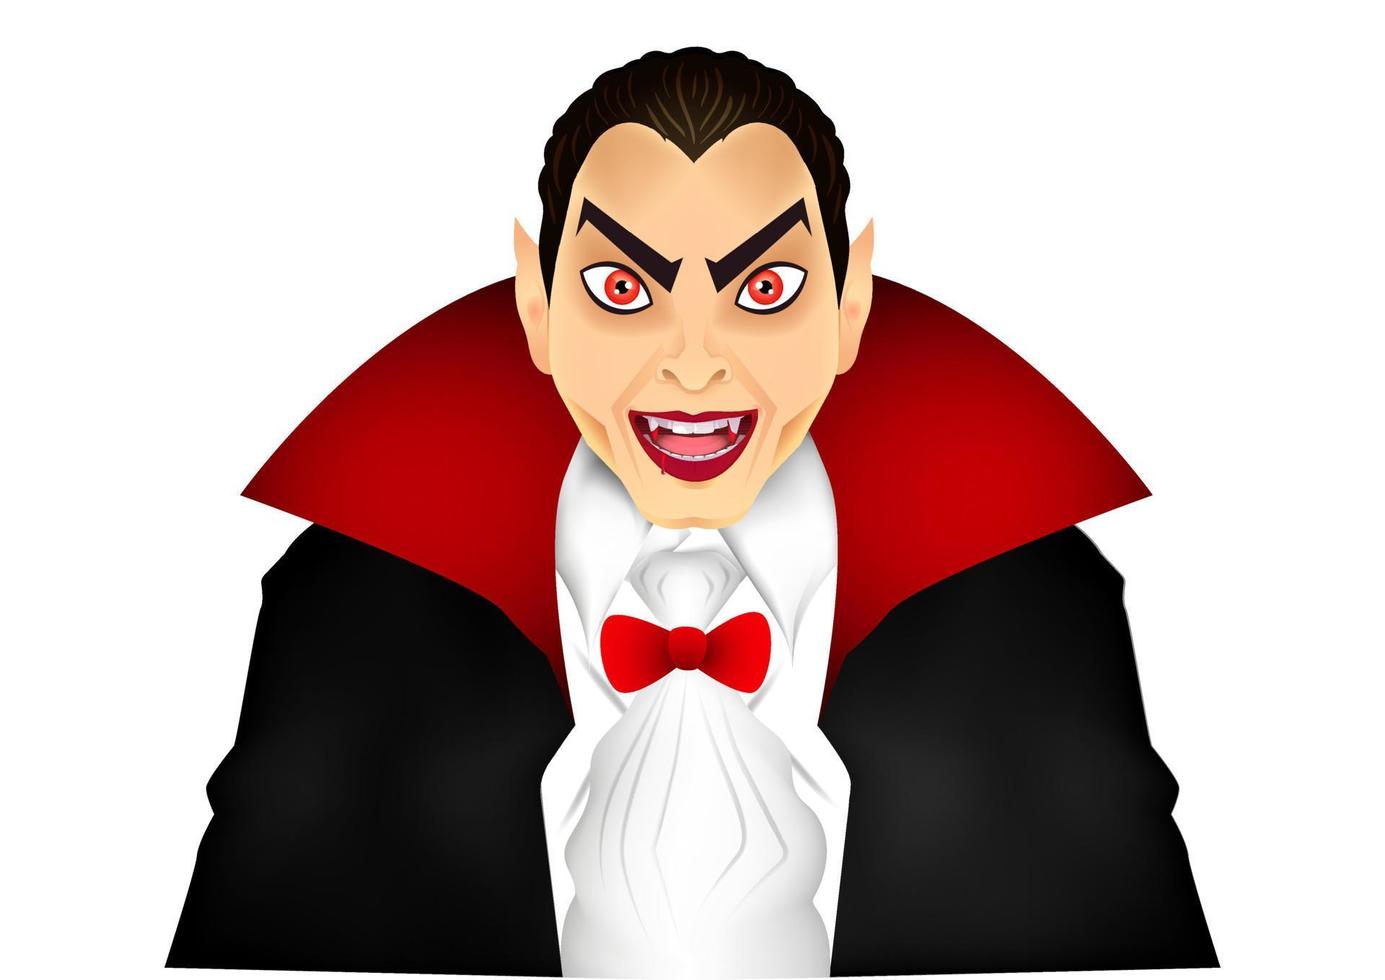 Realistic Dracula on white background. Vector illustration  a Vampire in a red cloak. Creepy silhouette of a vampire